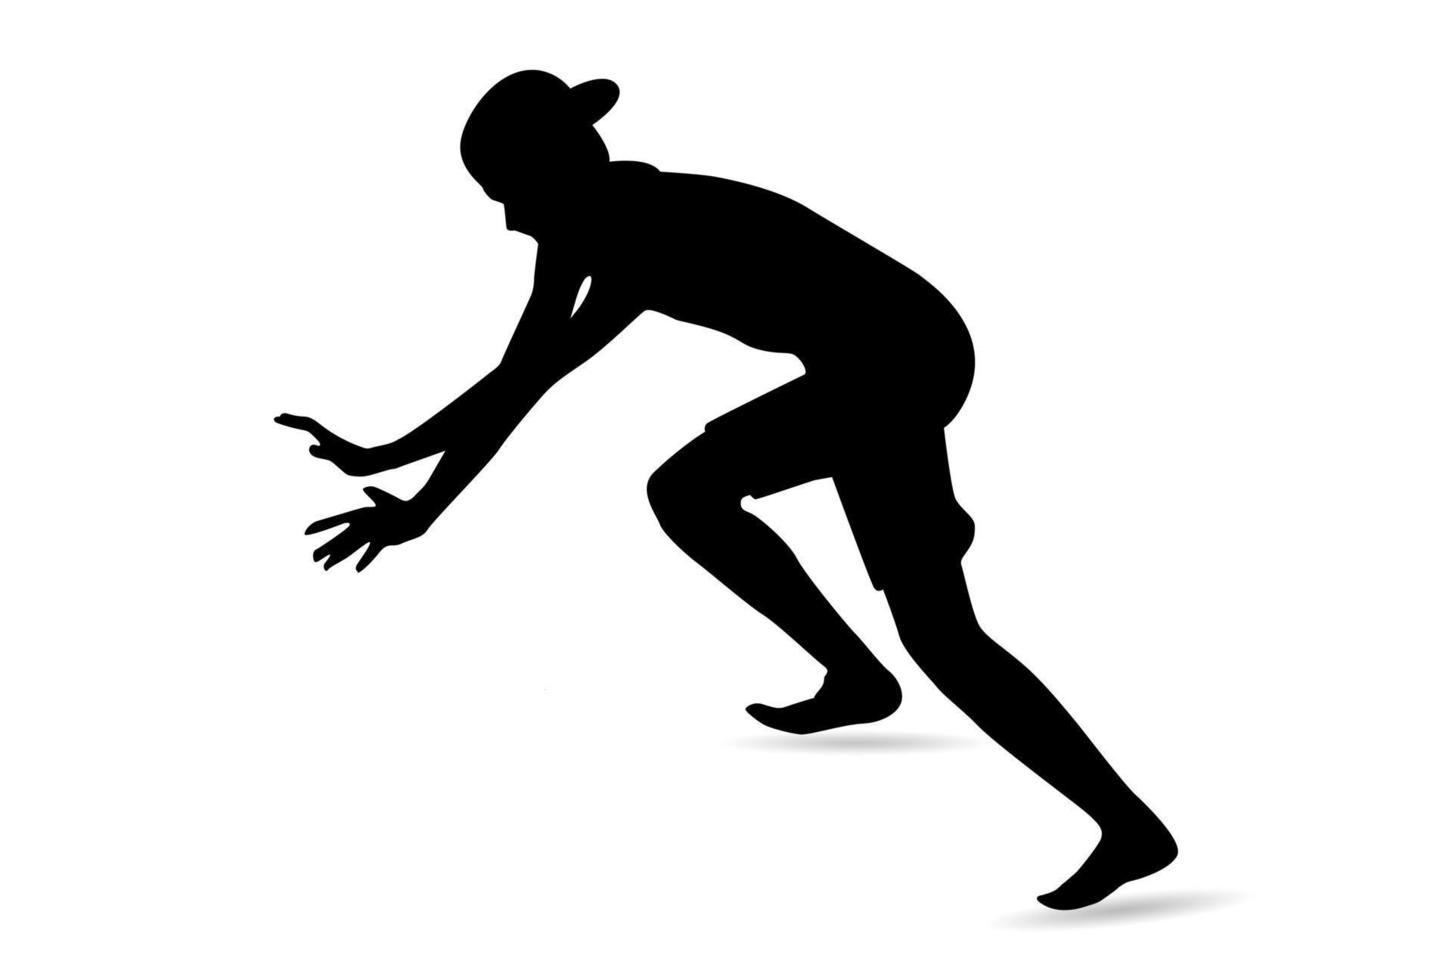 Silhouette of a young man trying to move something by pushing. Object pushing silhouette illustration, isolated on white background. vector